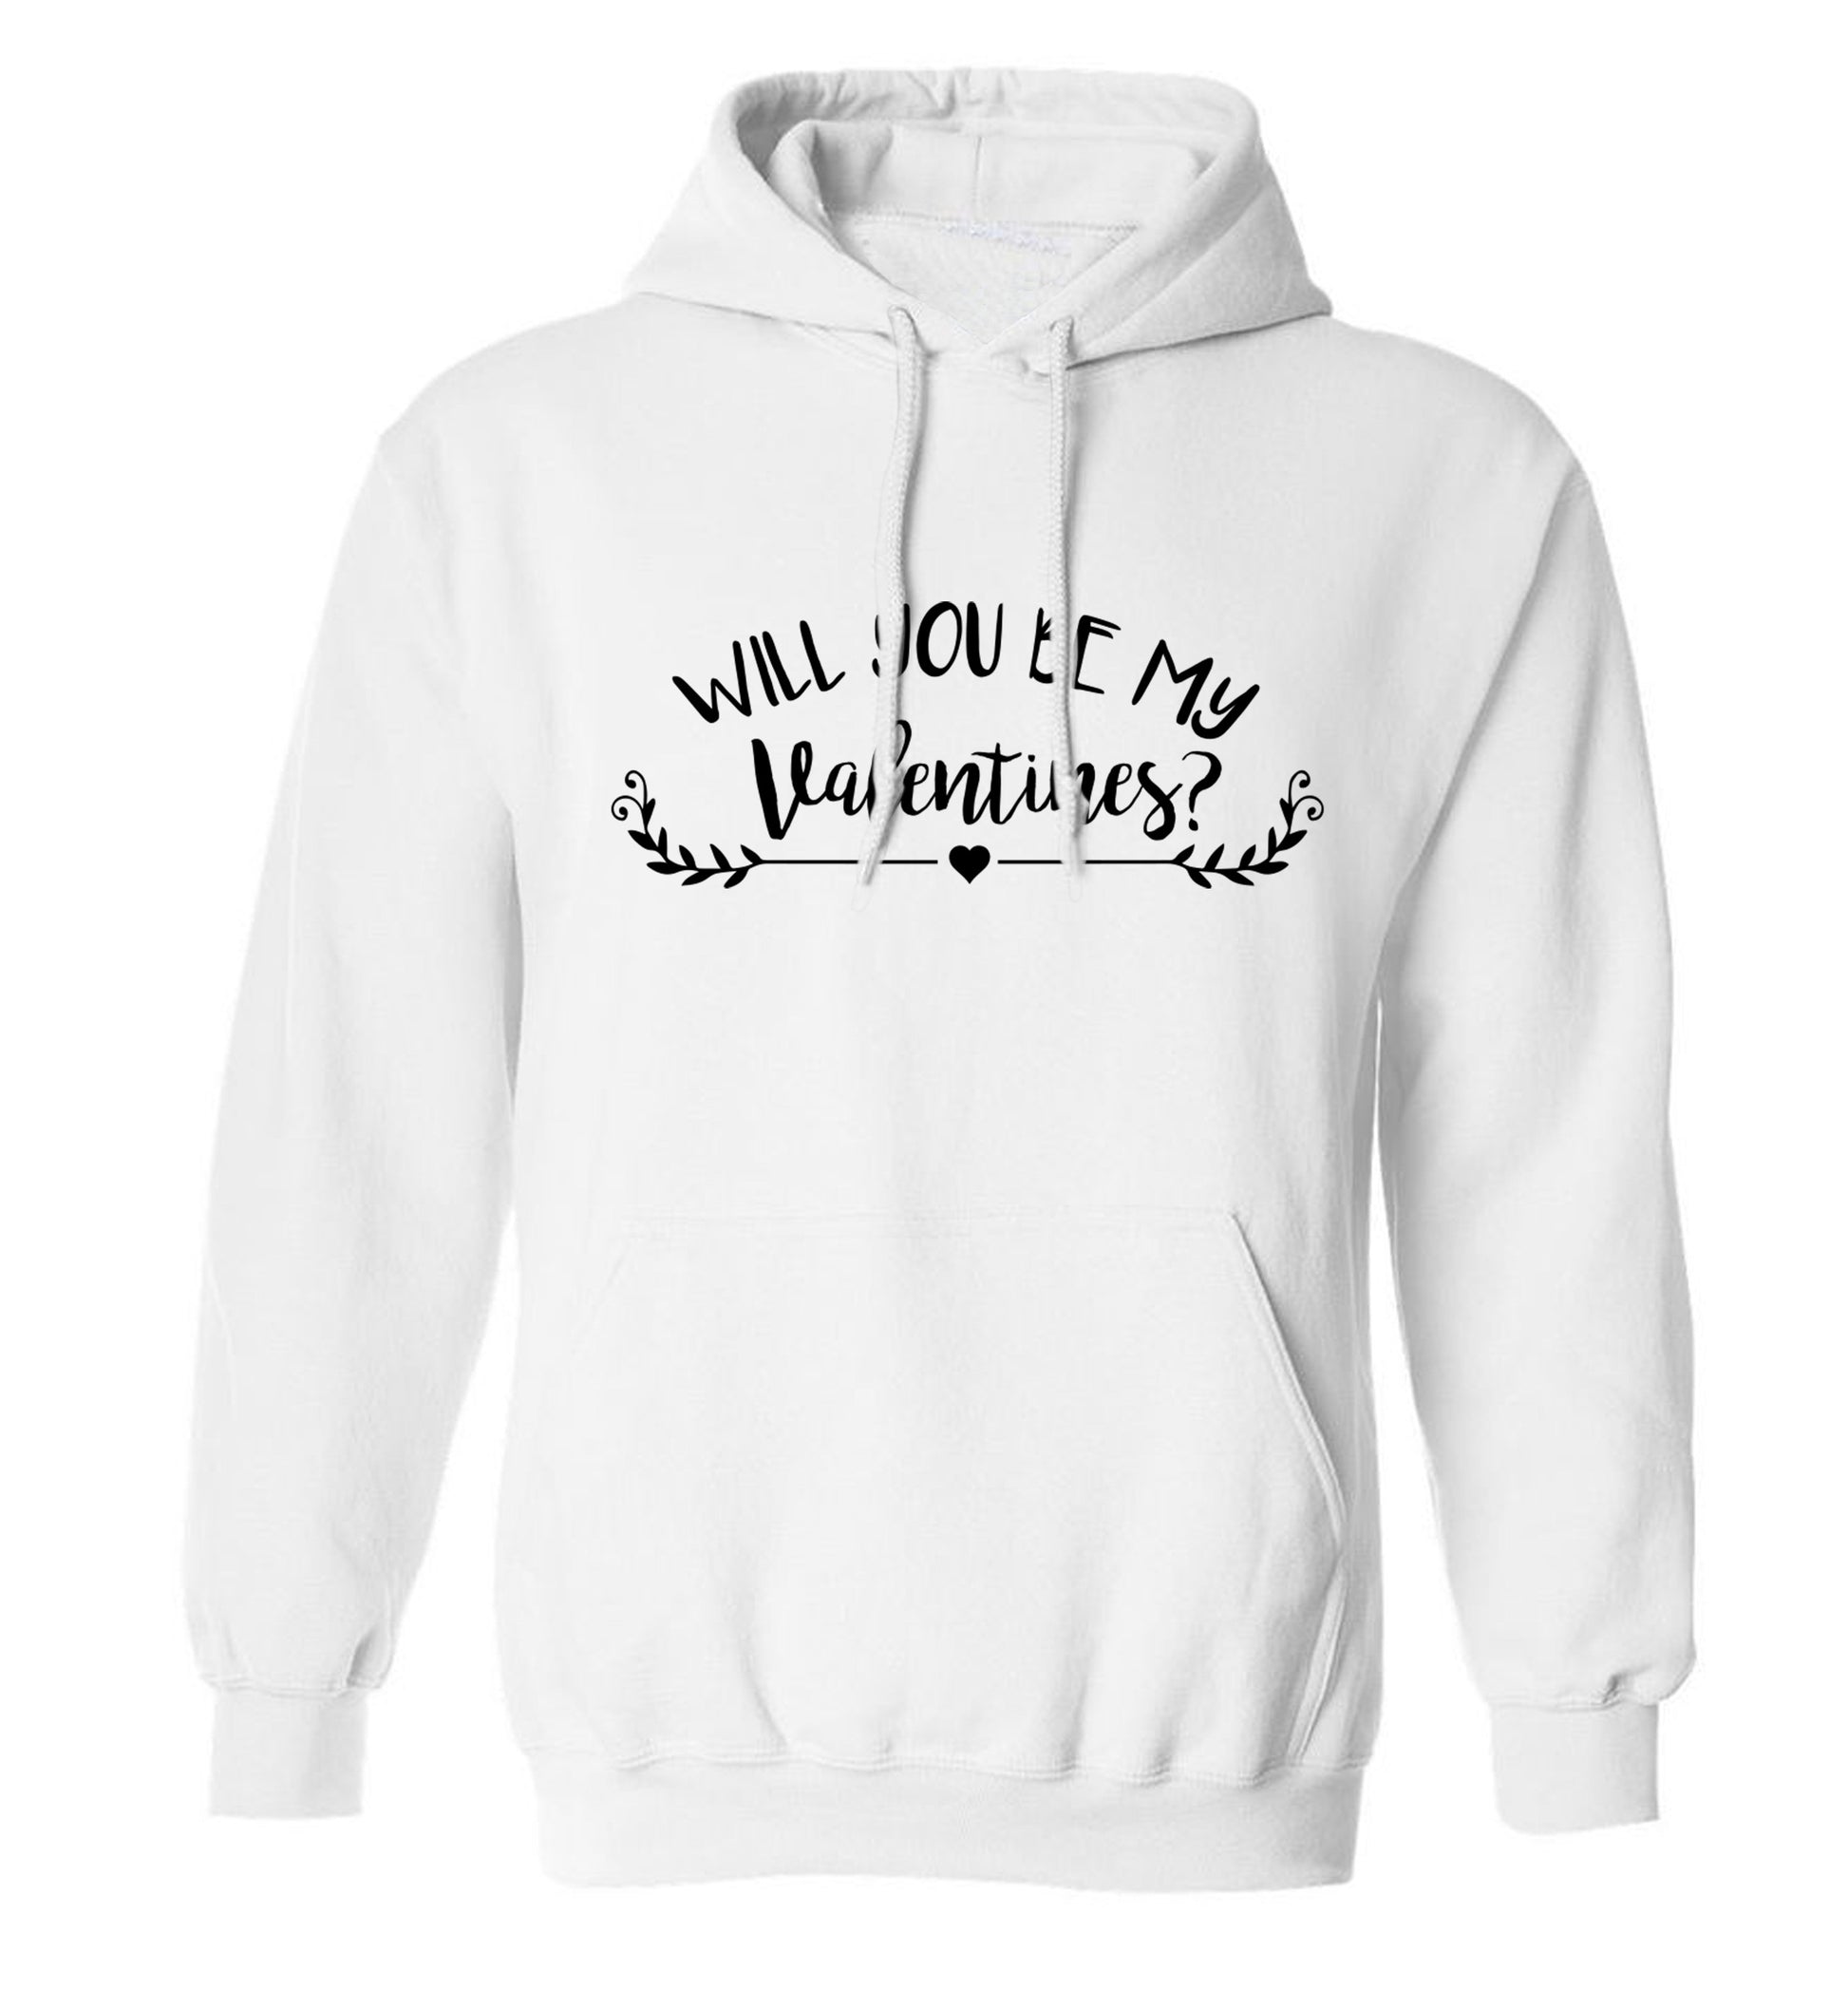 Will you be my valentines? adults unisex white hoodie 2XL